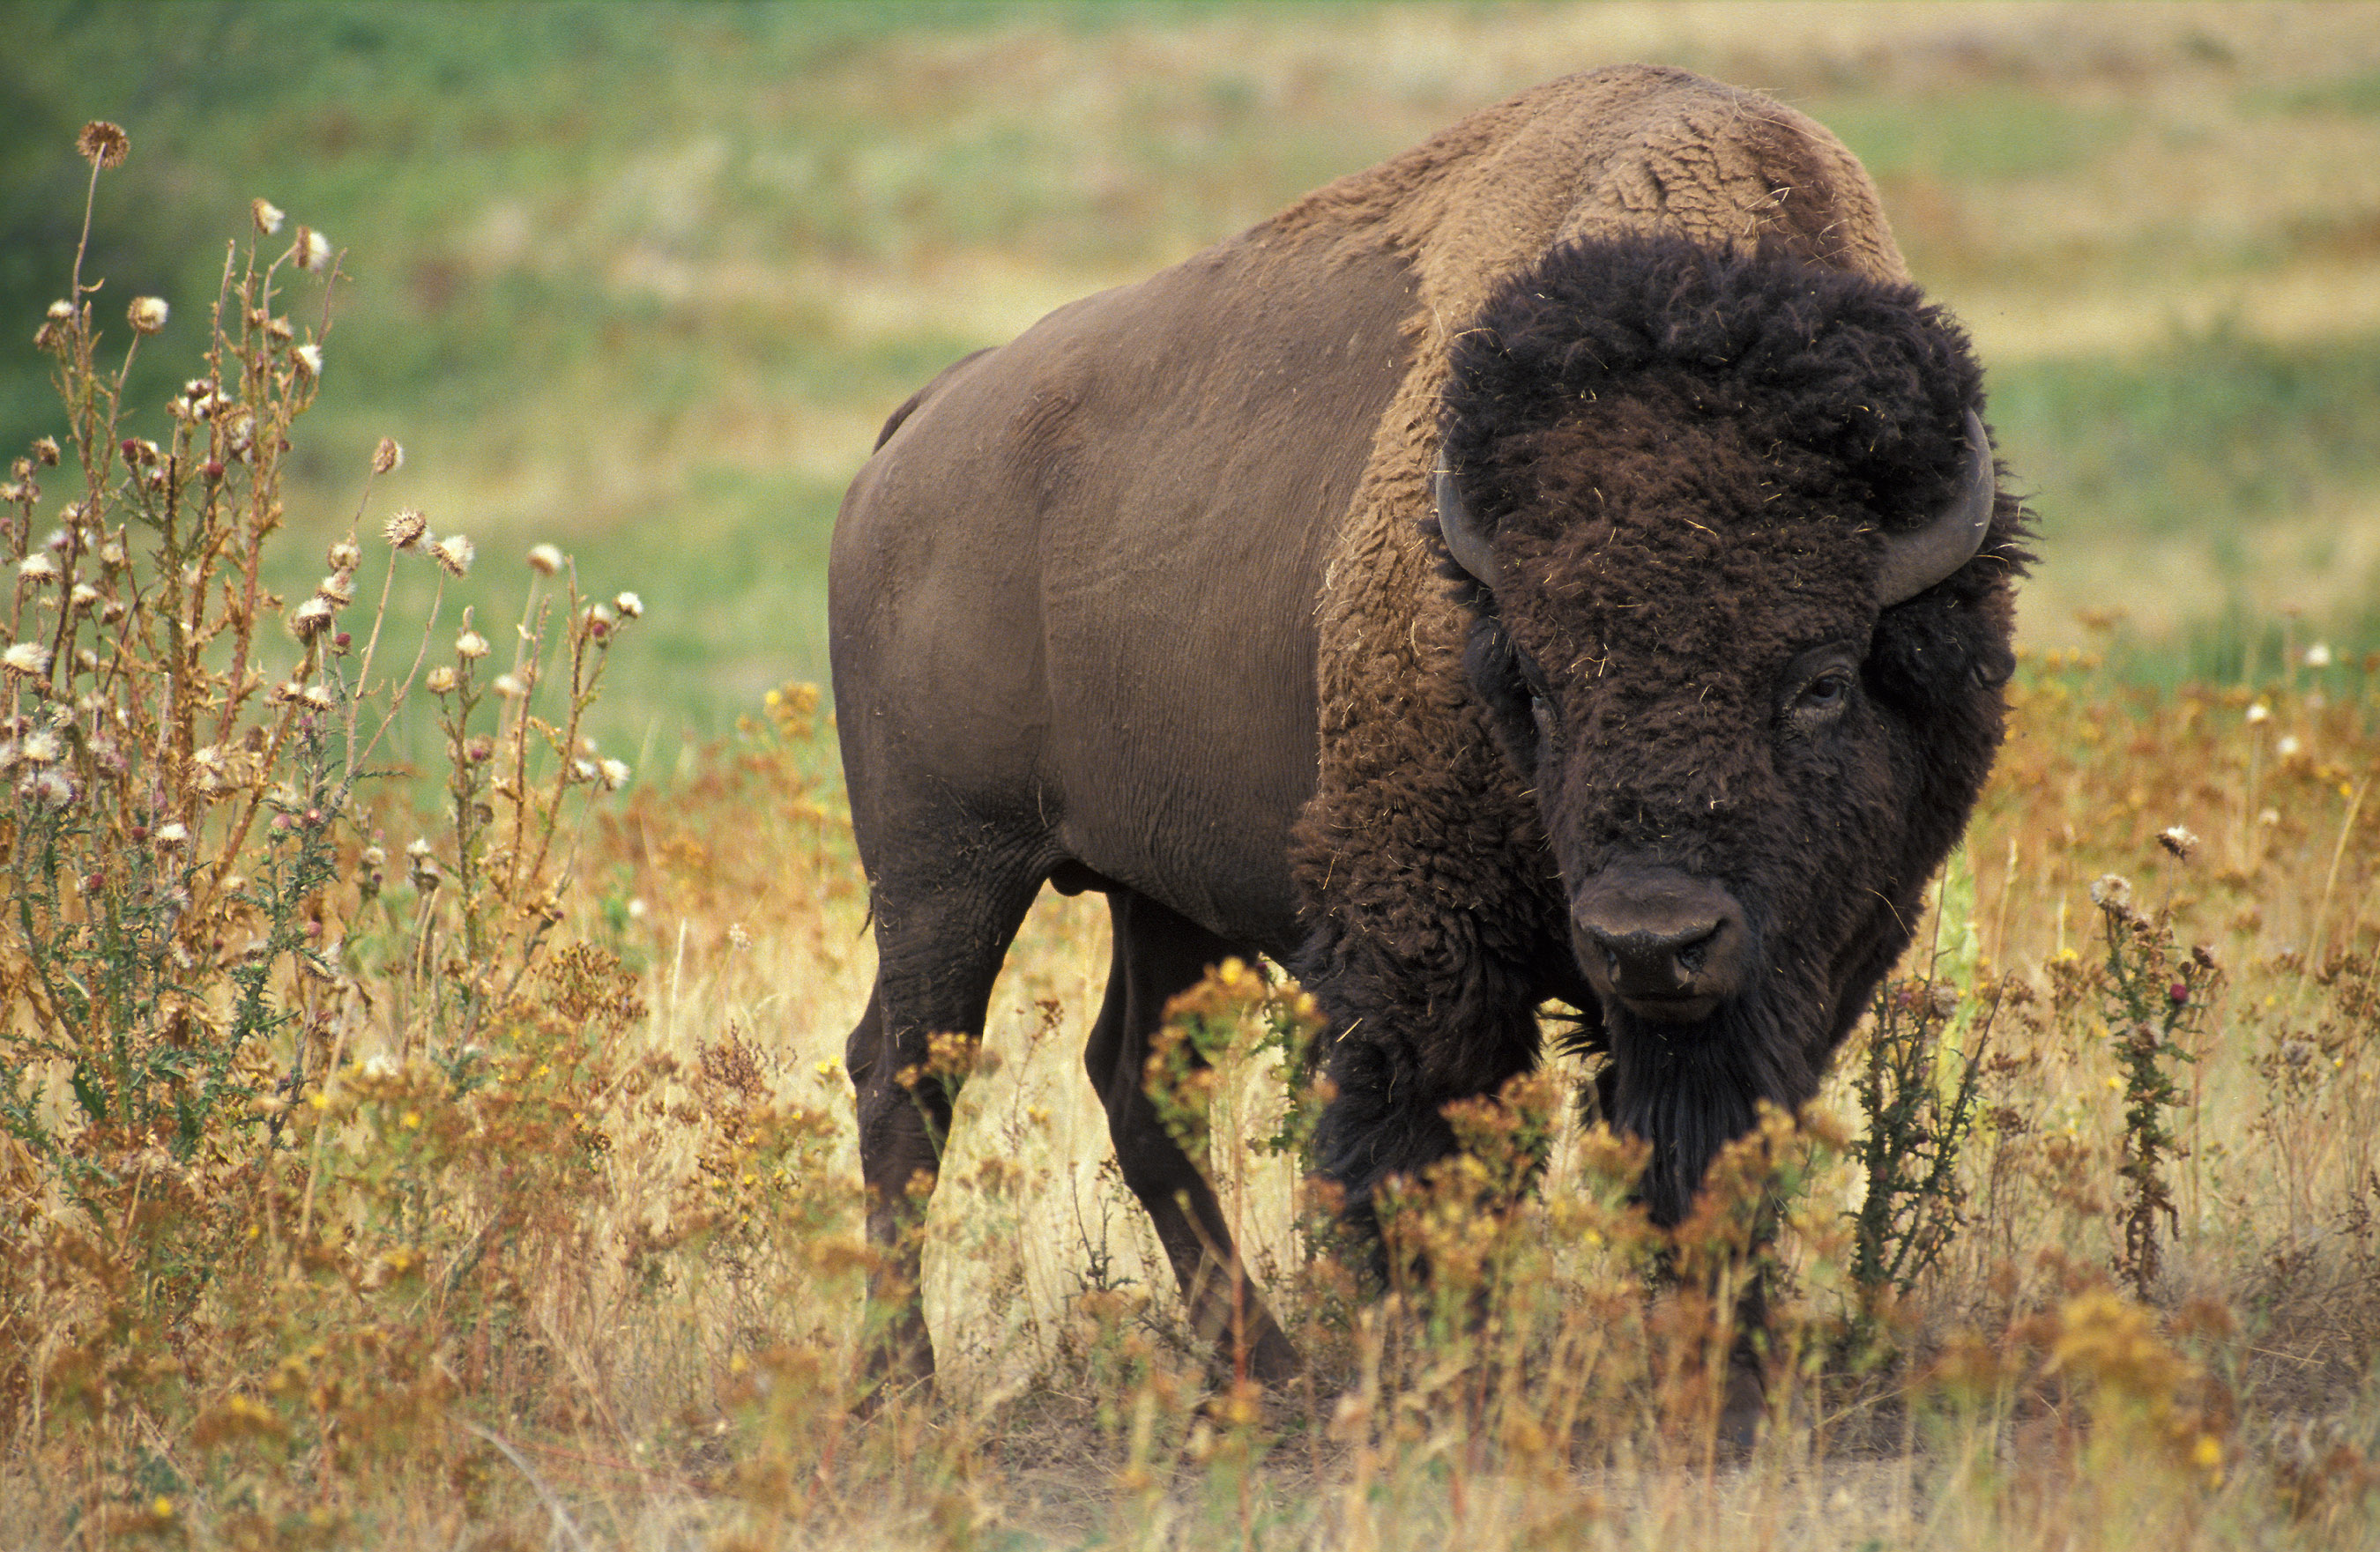 Bison wallpapers in high quality, Animal photography mesmerizing, 4K wallpapers for 2019, Wildlife wonder, 2700x1770 HD Desktop